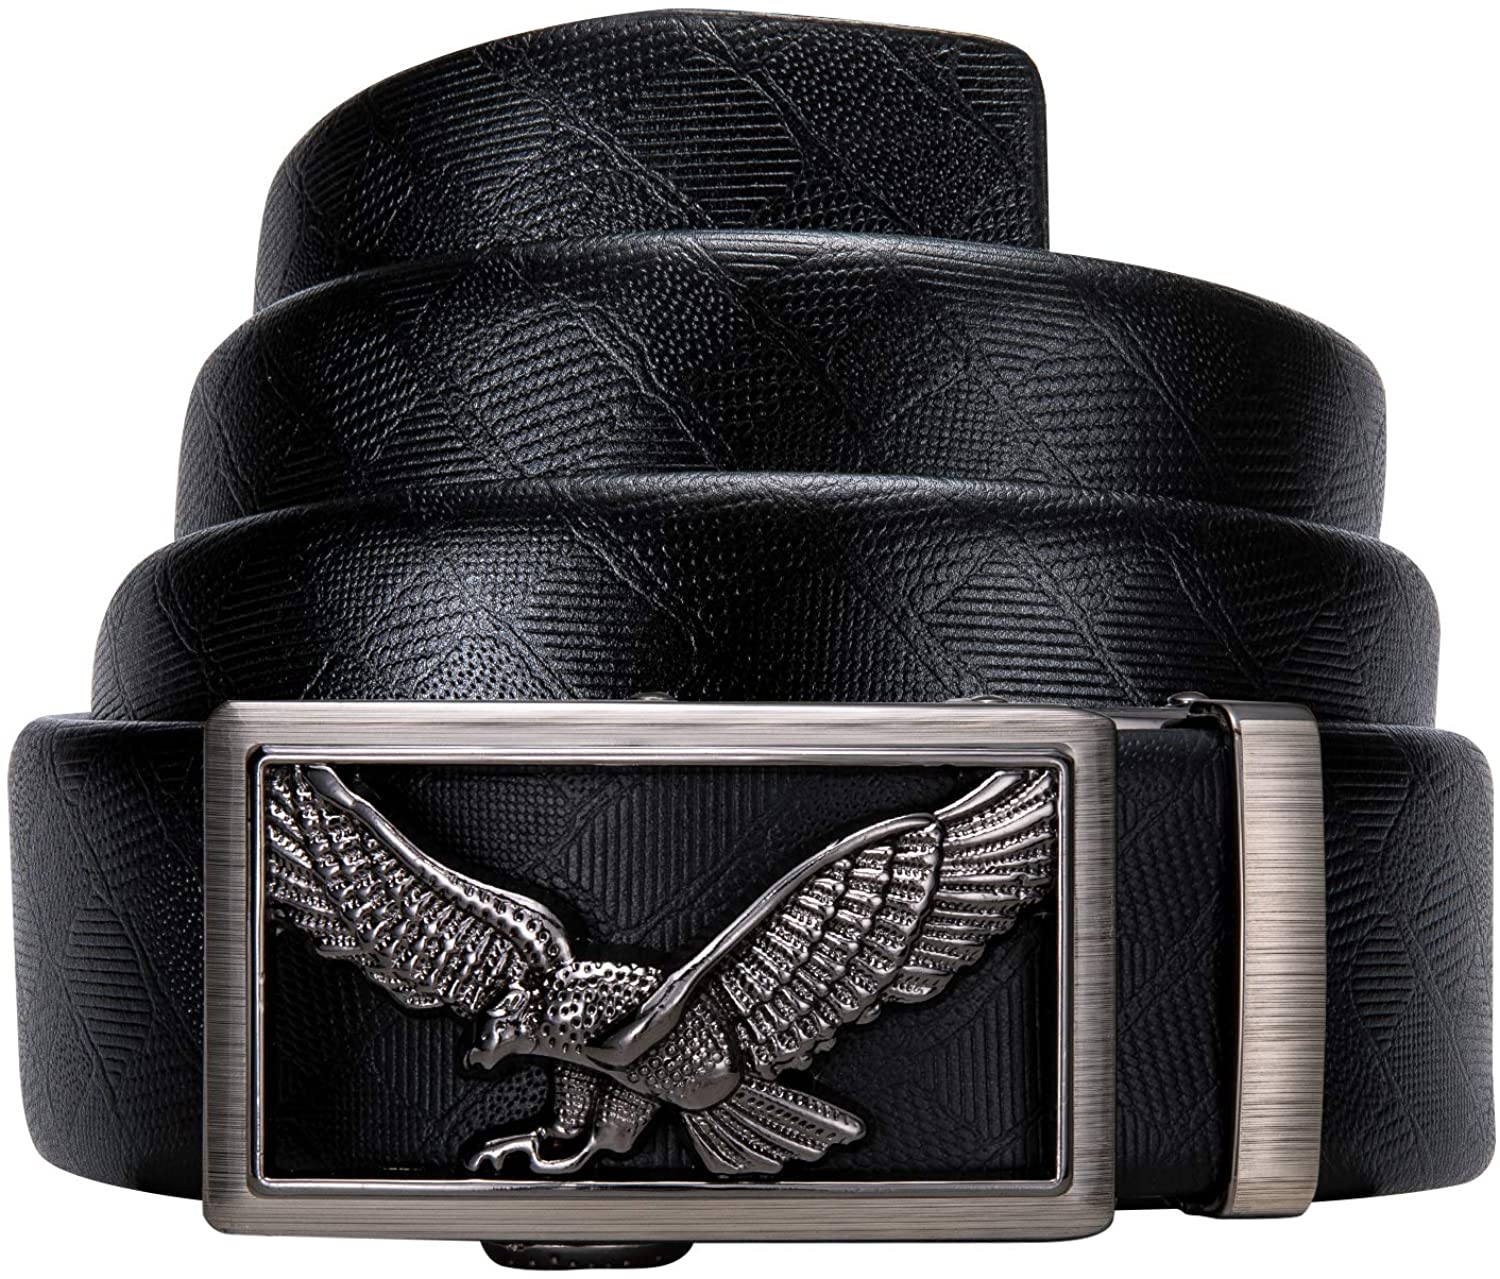 Barrywang Mens Ratchet Beltgenuine Leather Belt With Automatic Buckle